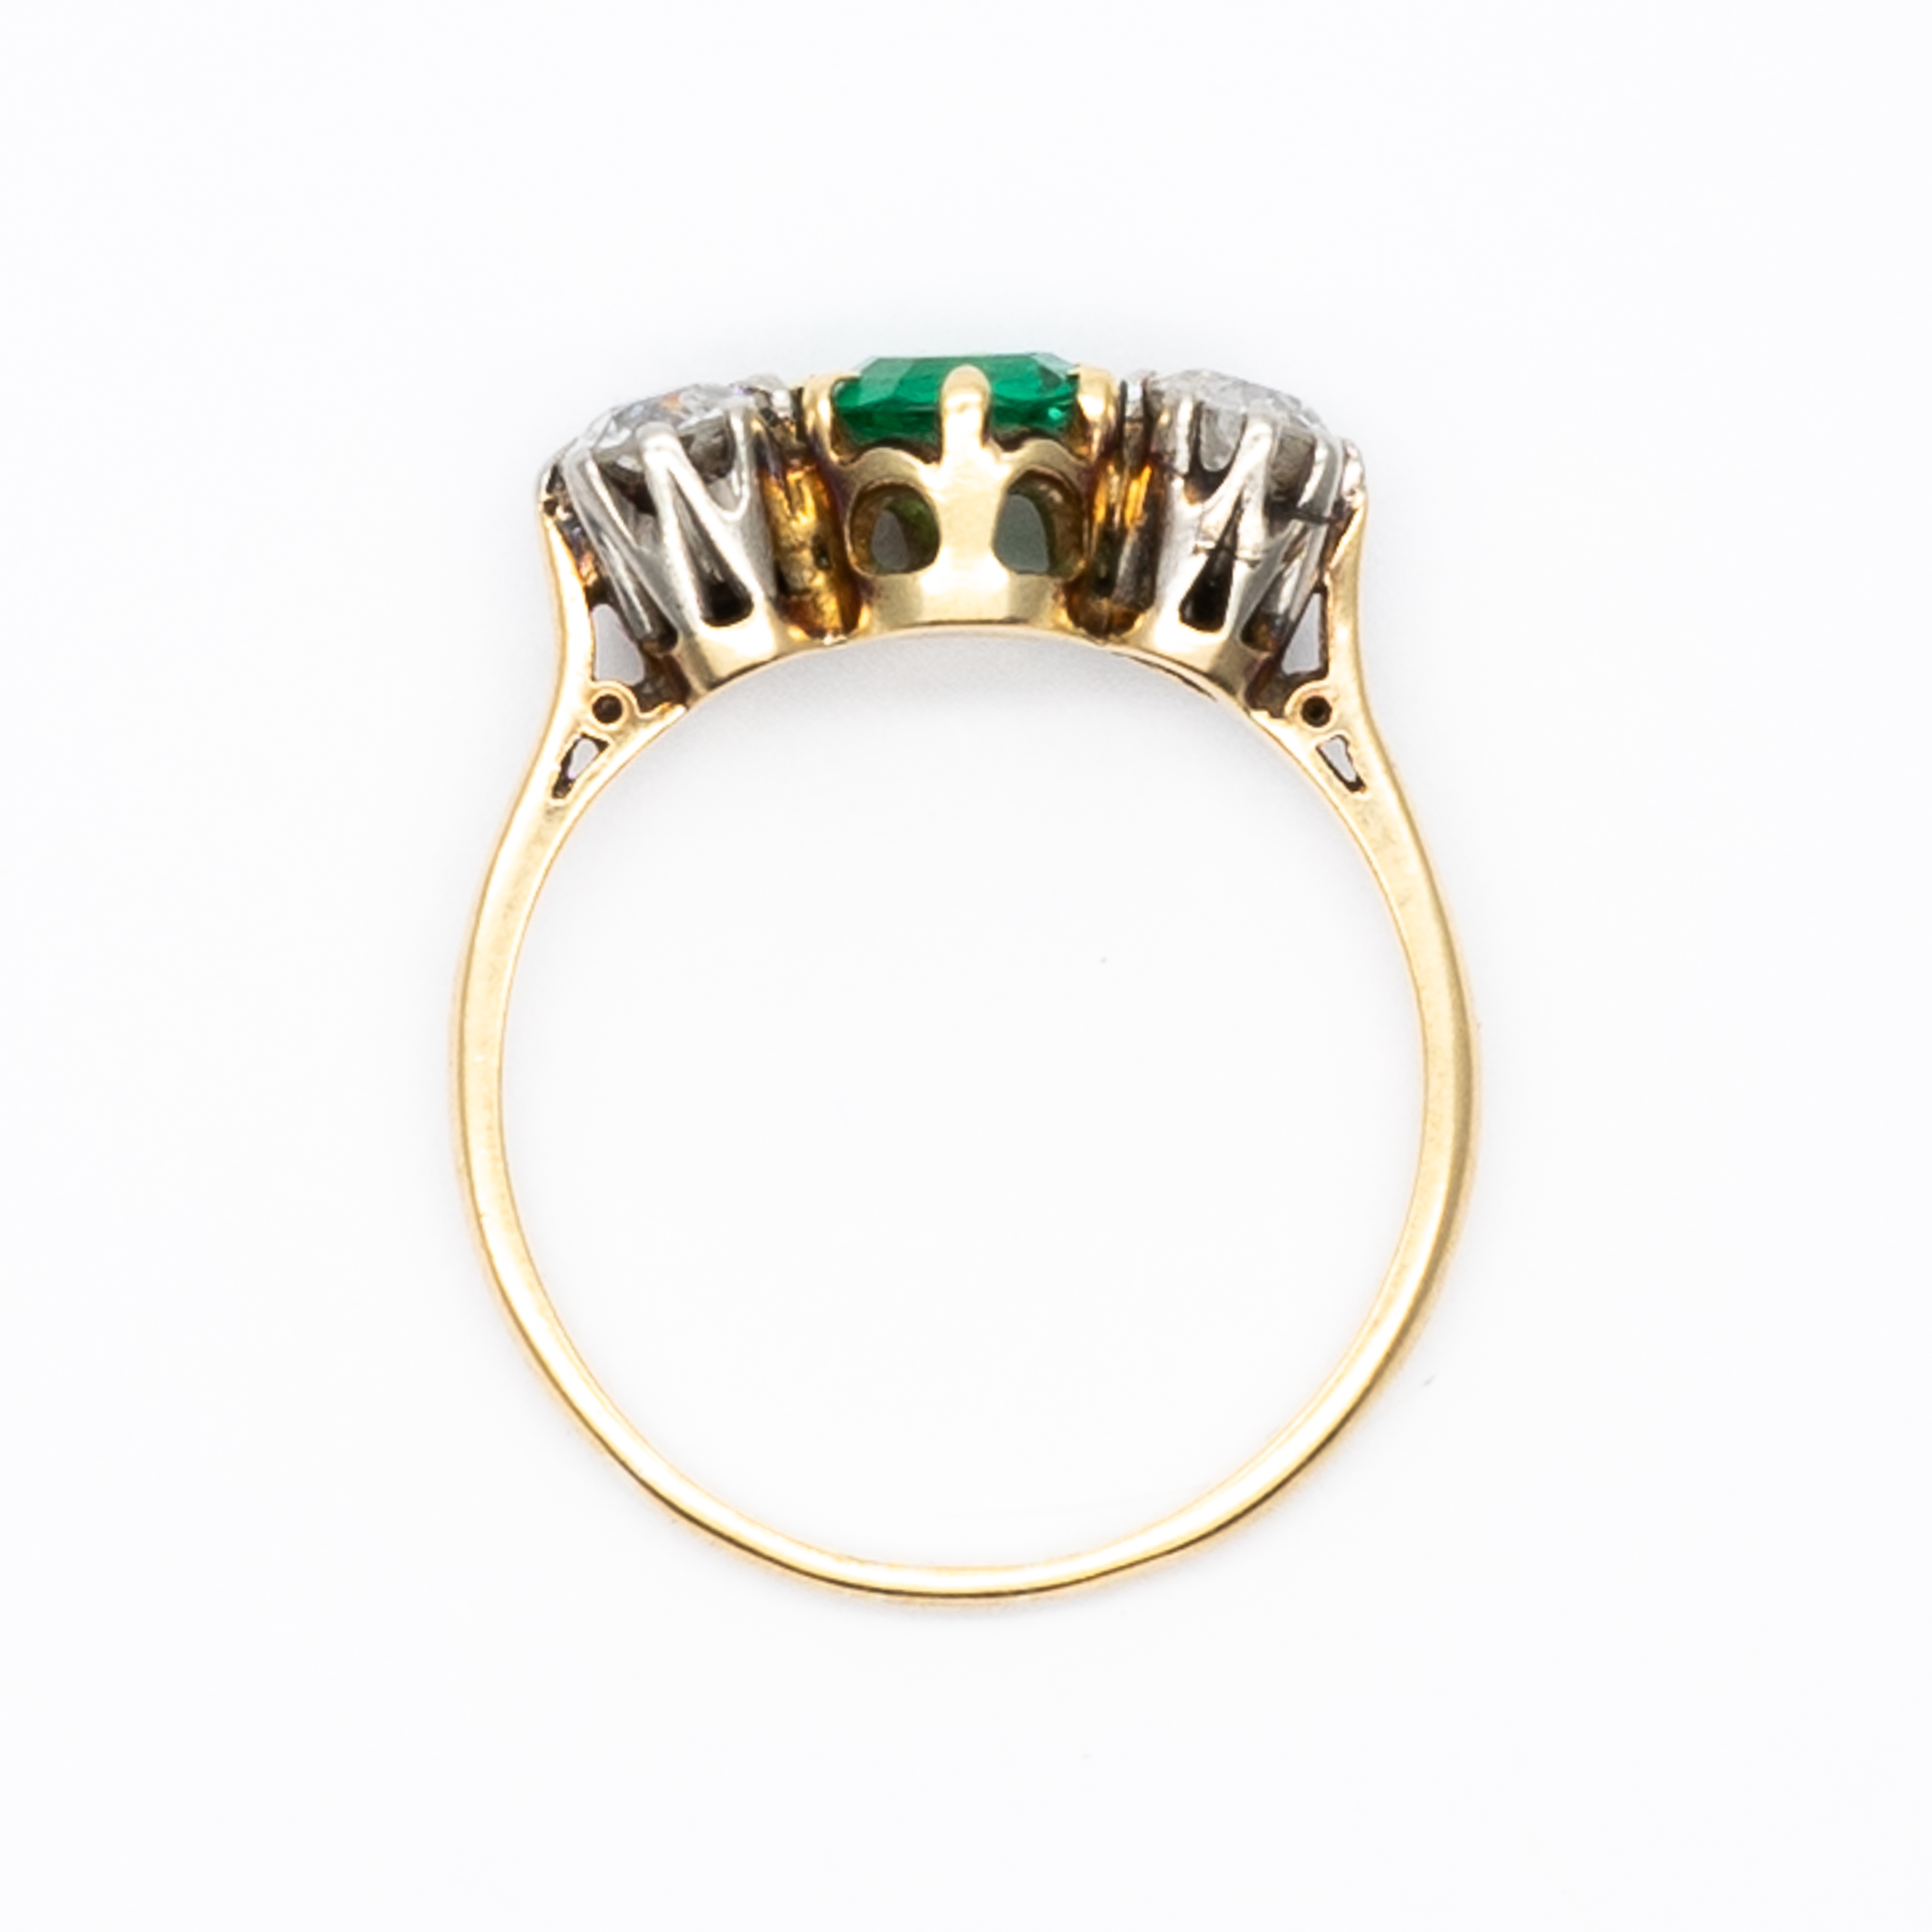 An 18ct yellow gold emerald and diamond ring - Image 5 of 6